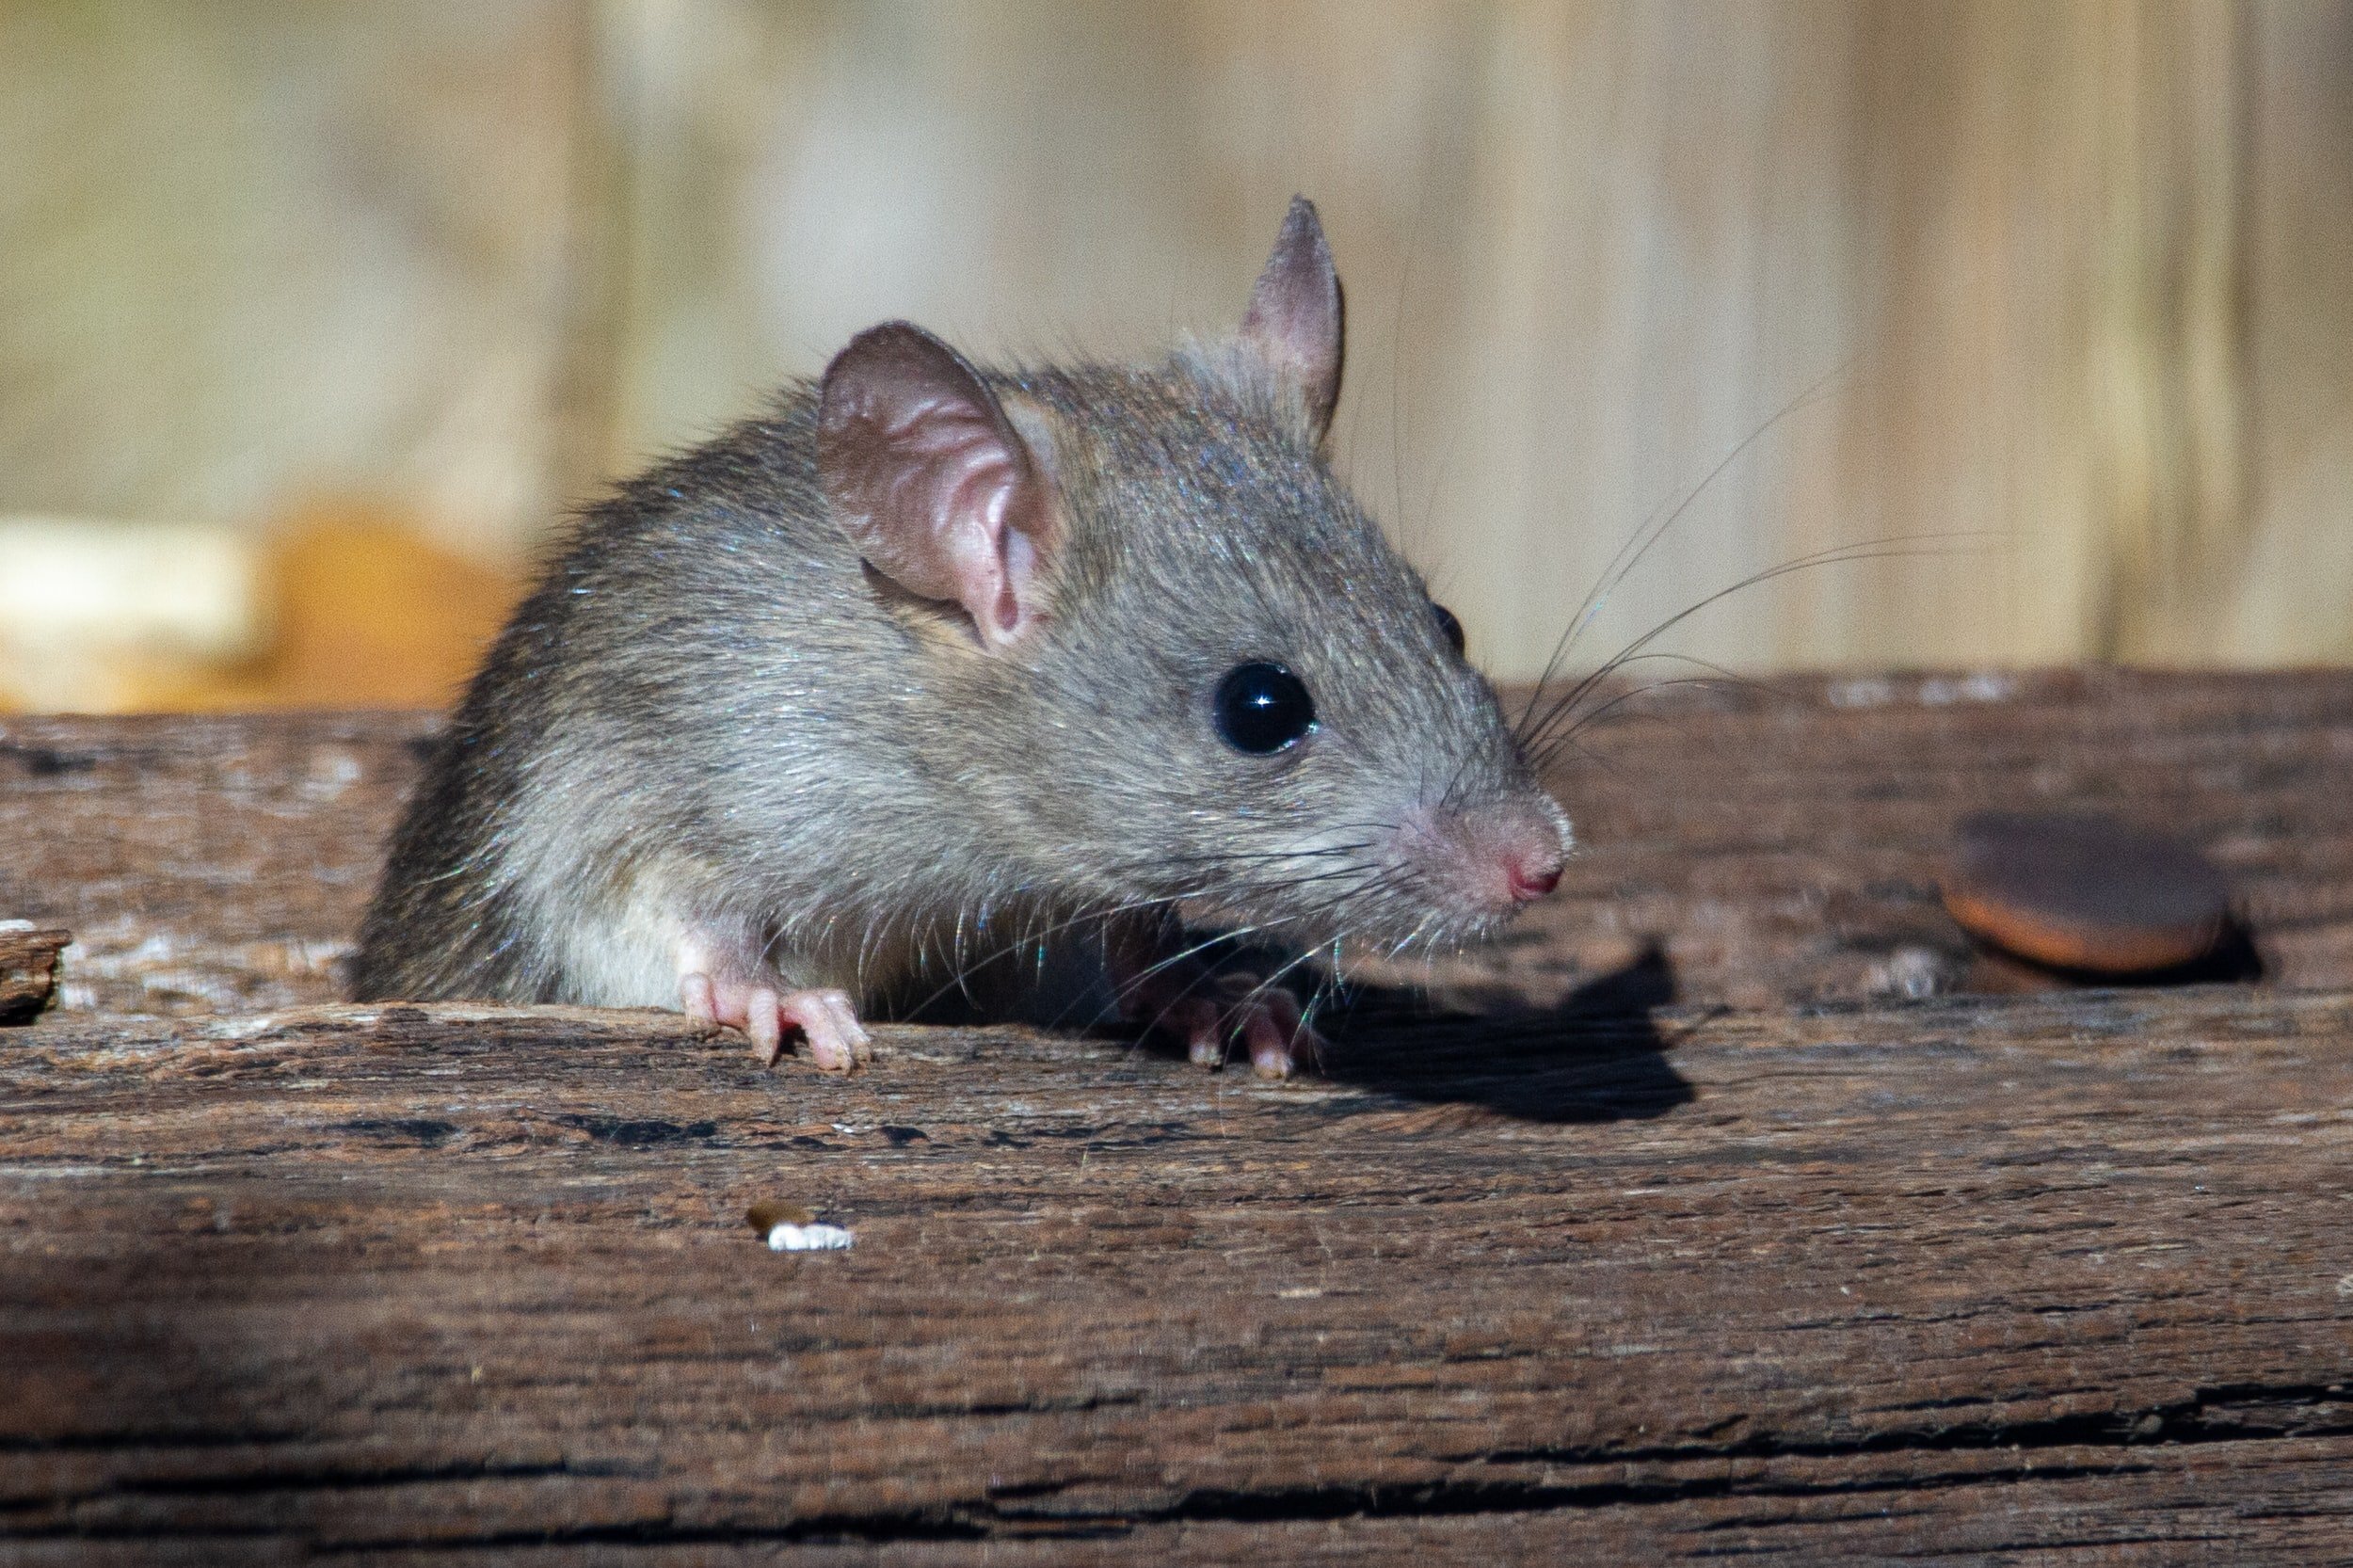 What to Do if You See Someone Selling or Using Glue Traps - PETA UK